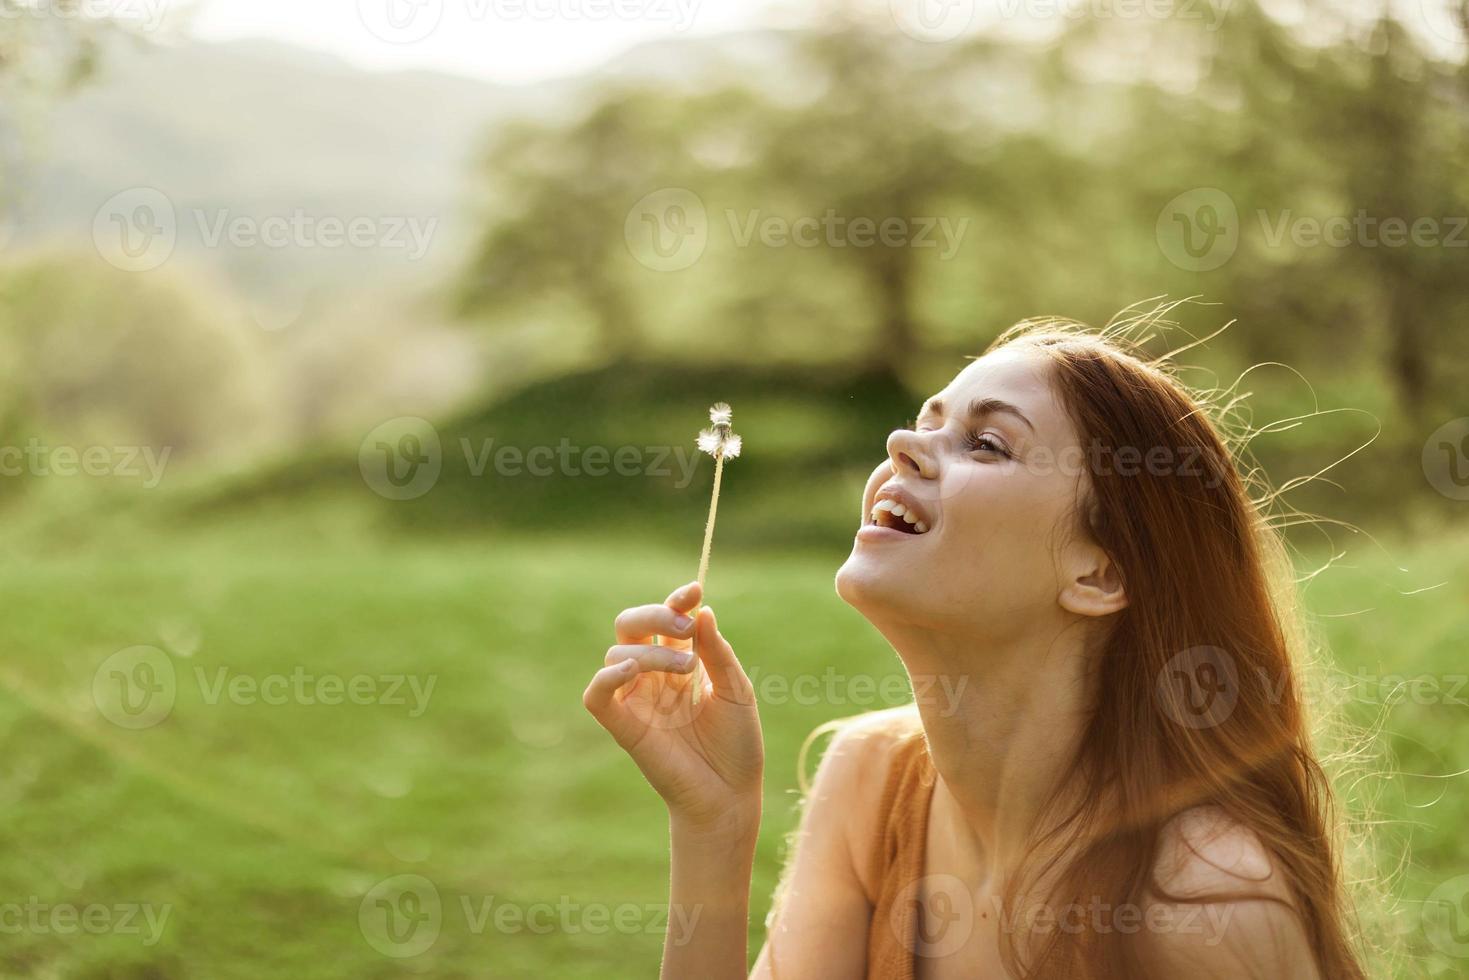 The happy woman smiles and blows the dandelion in the wind. Summer green landscape and sunshine in the background photo